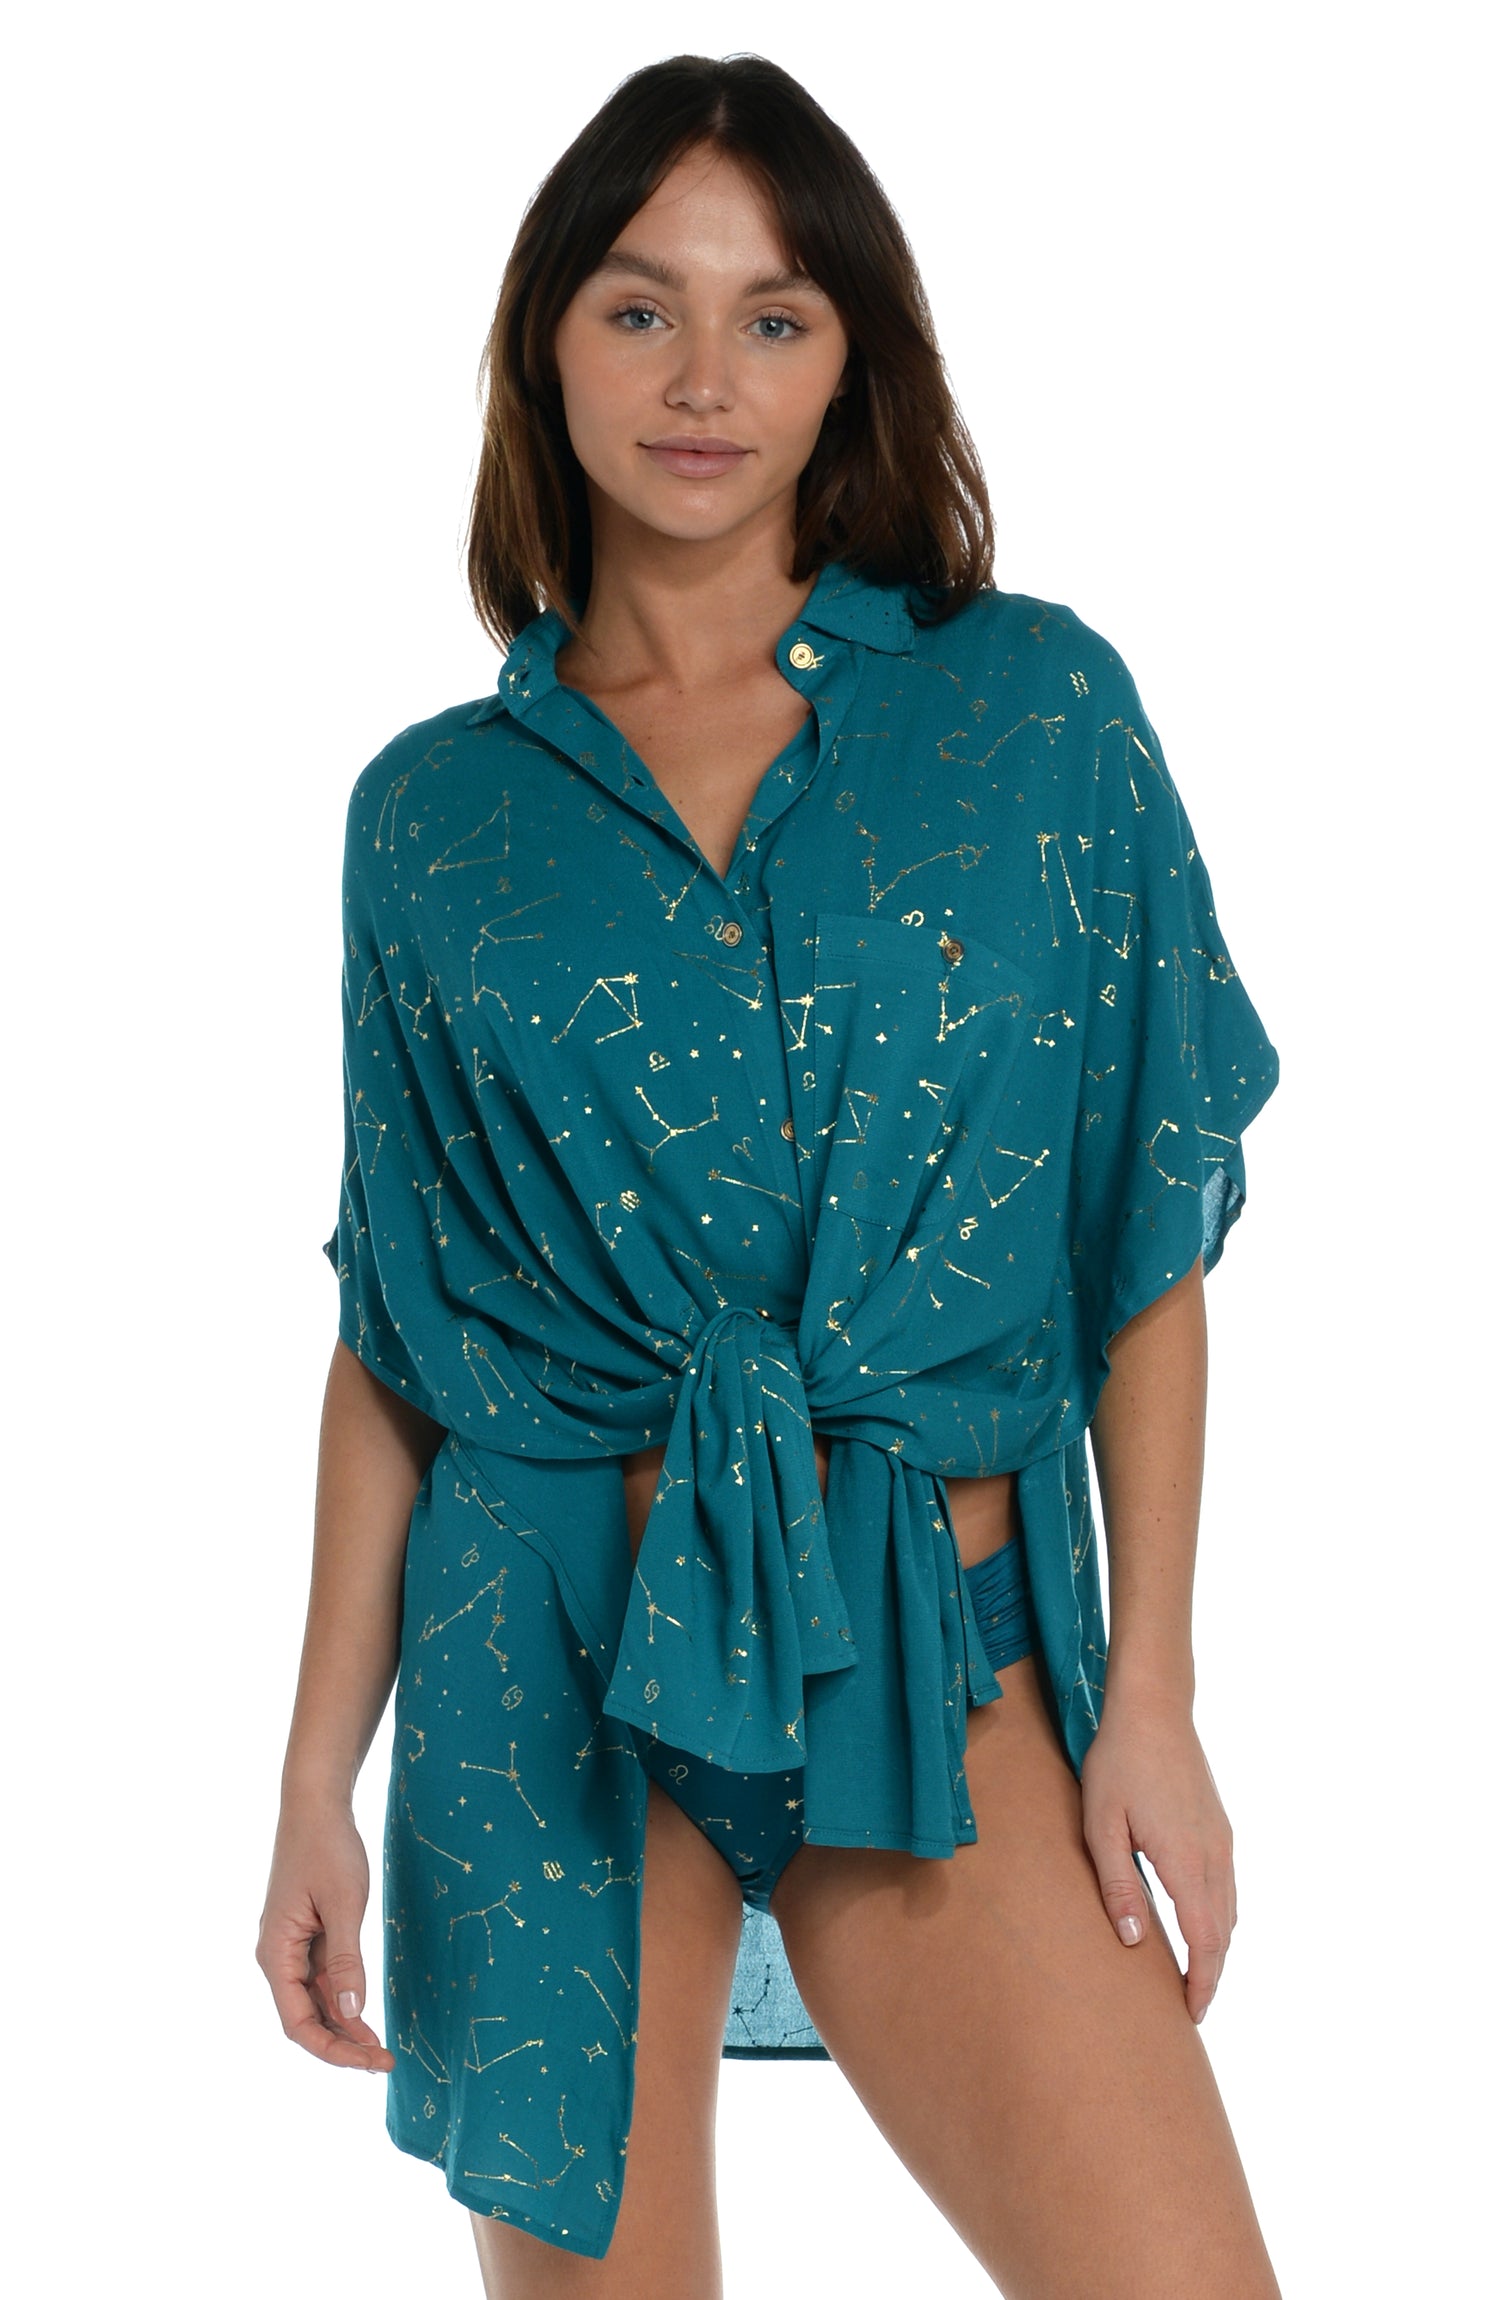 Model is wearing a solid teal colored resort button down cover up shirt from our Zodiac collection.